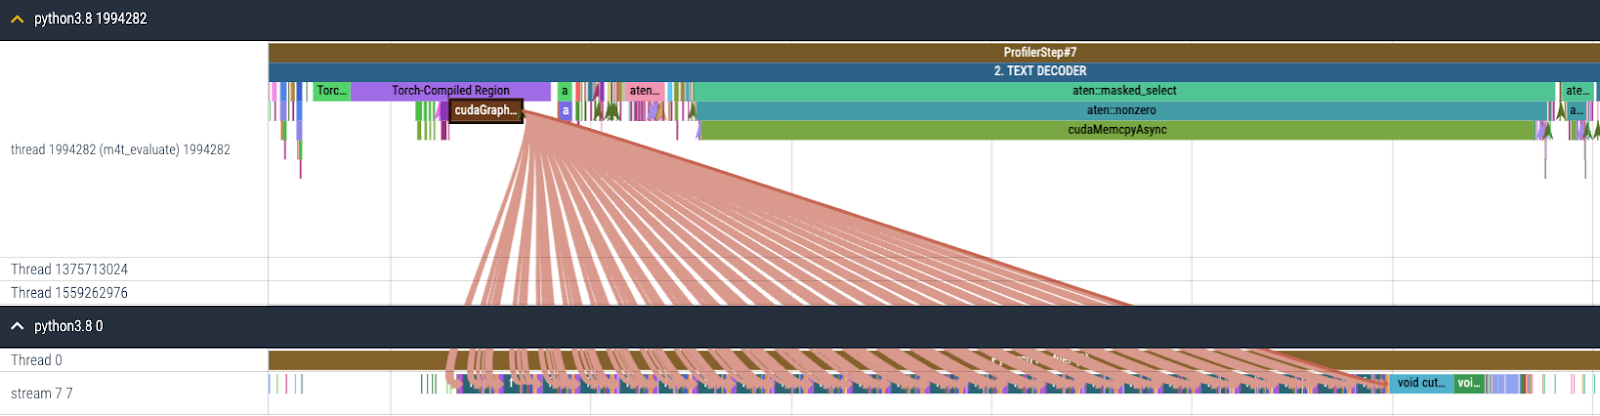 CPU and GPU trace for Text Decoder after torch.compile + CUDA Graph are enabled